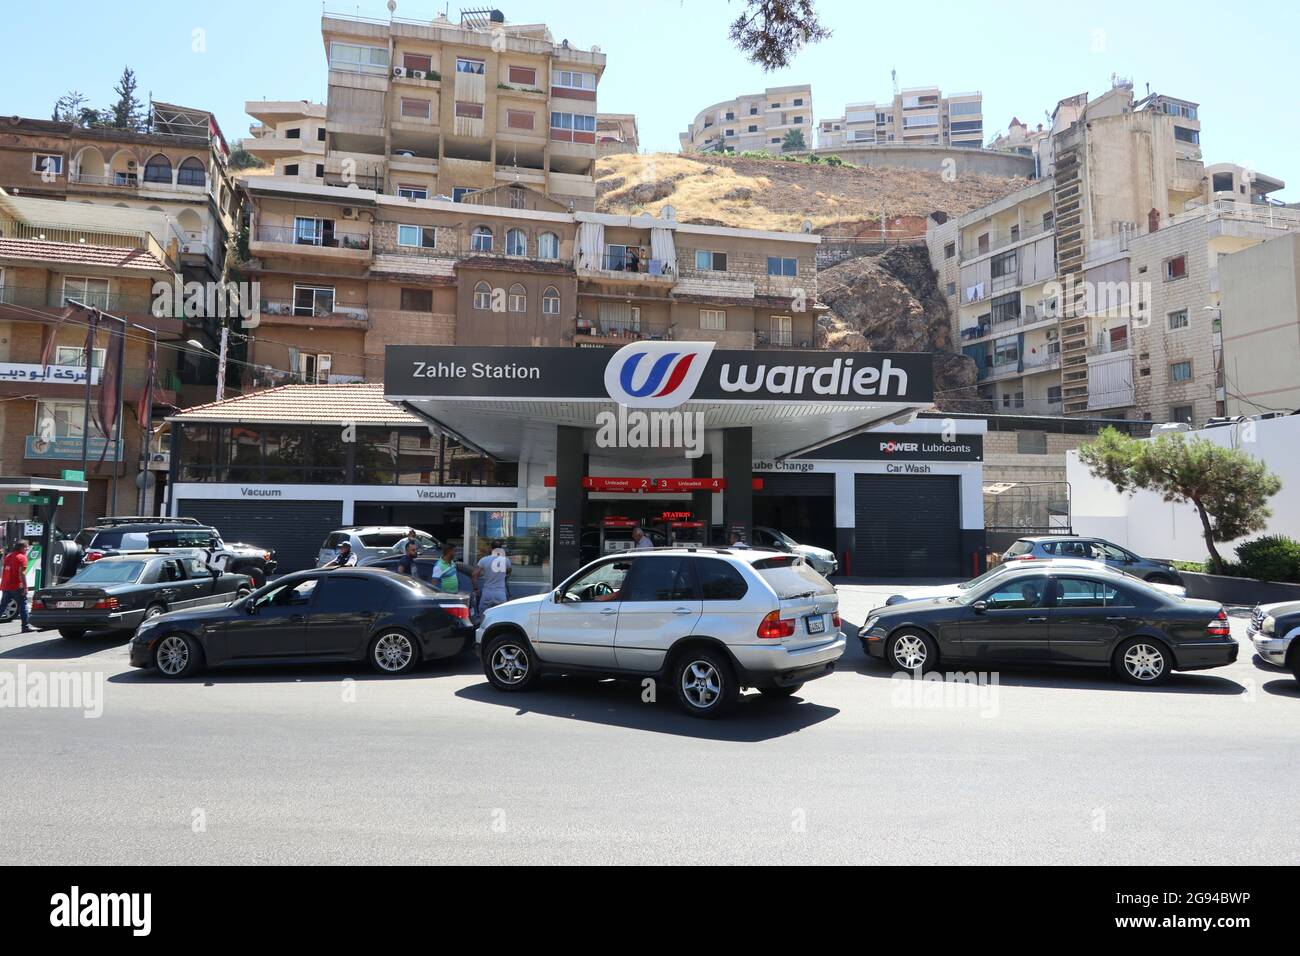 Beirut, Lebanon. 22nd July, 2021. Clients queue at a petrol station in Zahle, Lebanon, on July 22, 2021.Due to the lack of fuel, petrol stations in Lebanon currently can't serve the needs of all customers and people use to sleep at night in their cars waiting for the opening of stations. According the newspaper L'orient le jour, in the night between July 23 and 24 a truck hit some cars queueing at a petrol station in Beirut, killing a person and injurying three others. (Photo by Elisa Gestri/Sipa USA) Credit: Sipa USA/Alamy Live News Stock Photo